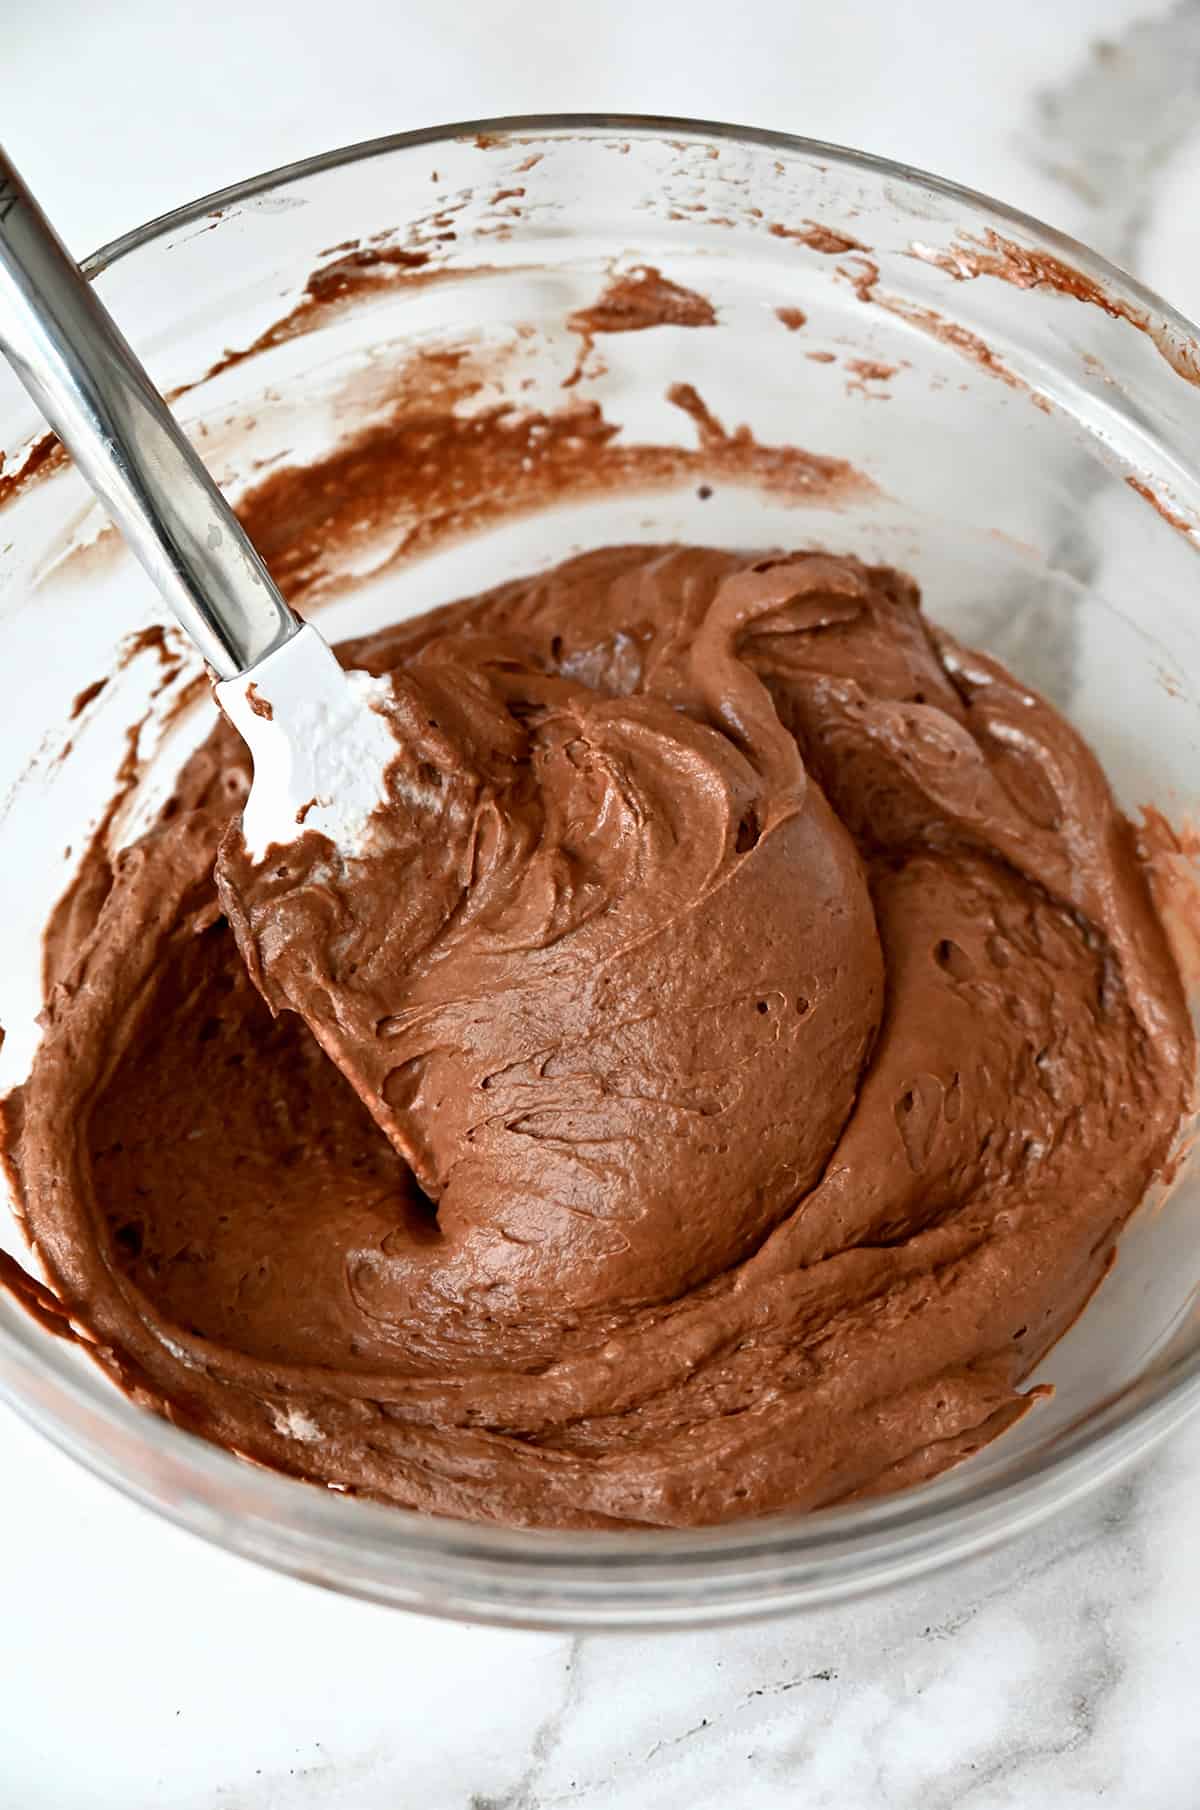 Chocolate mousse in a large glass mixing bowl with a rubber spatula propped up against its side.